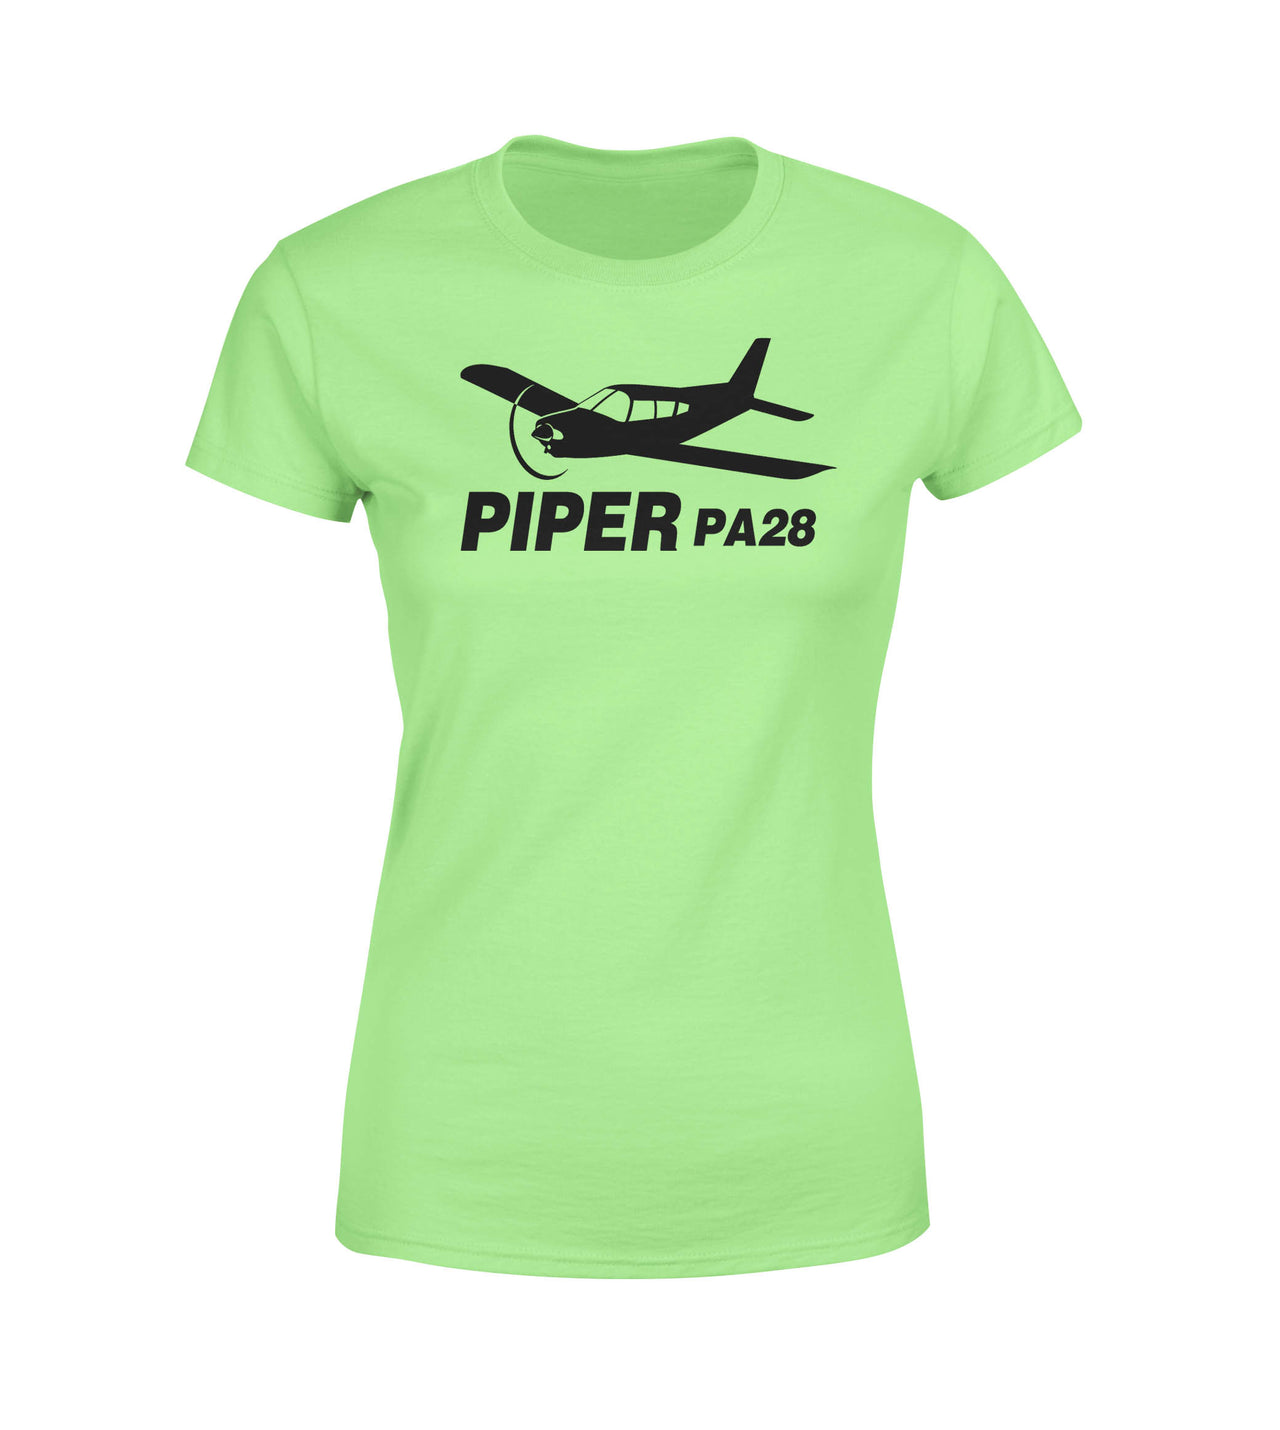 The Piper PA28 Designed Women T-Shirts